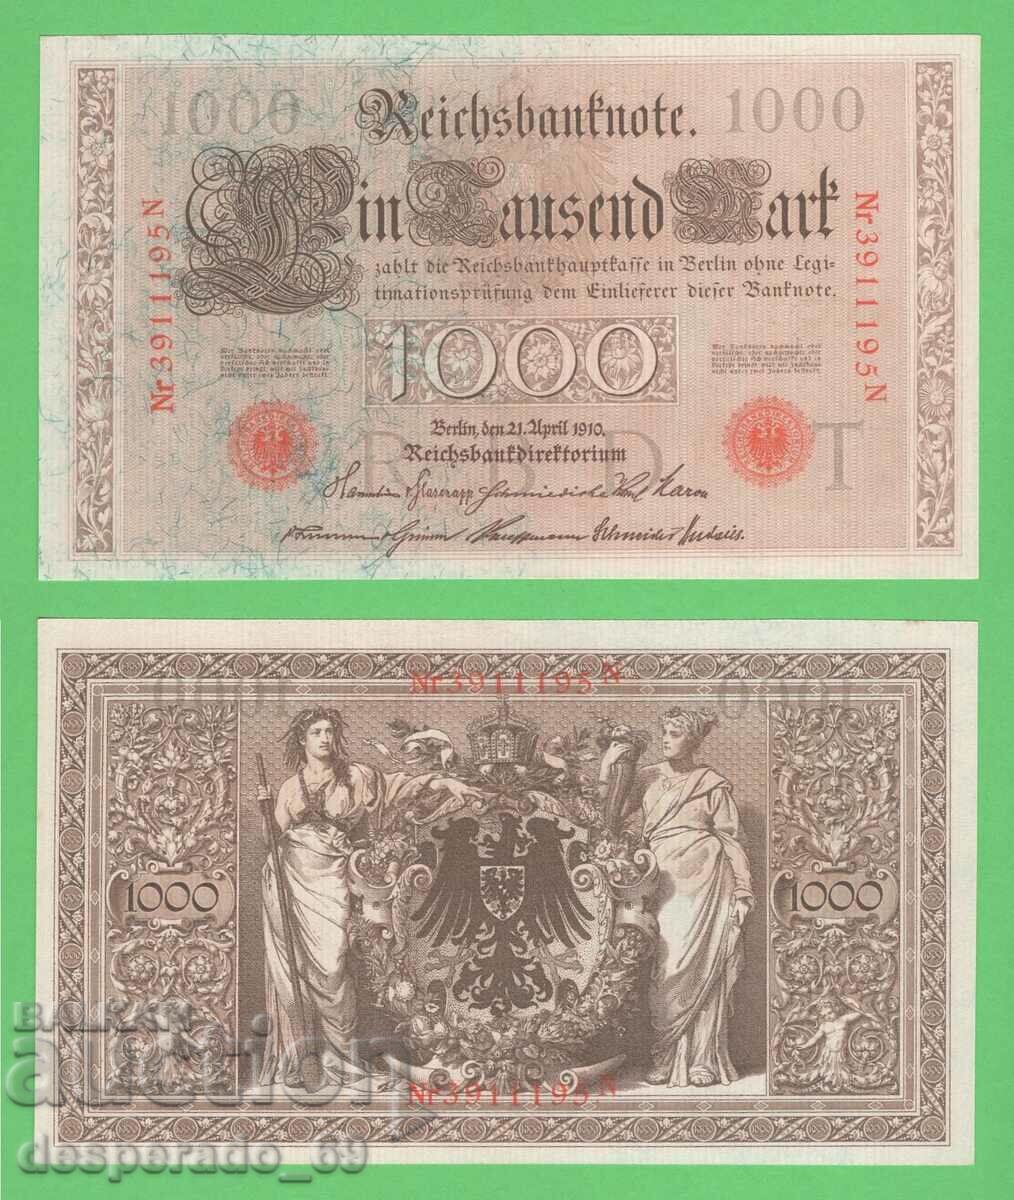 (¯`'•.¸GERMANY 1000 Marks 1910 UNC¸.•'´¯)